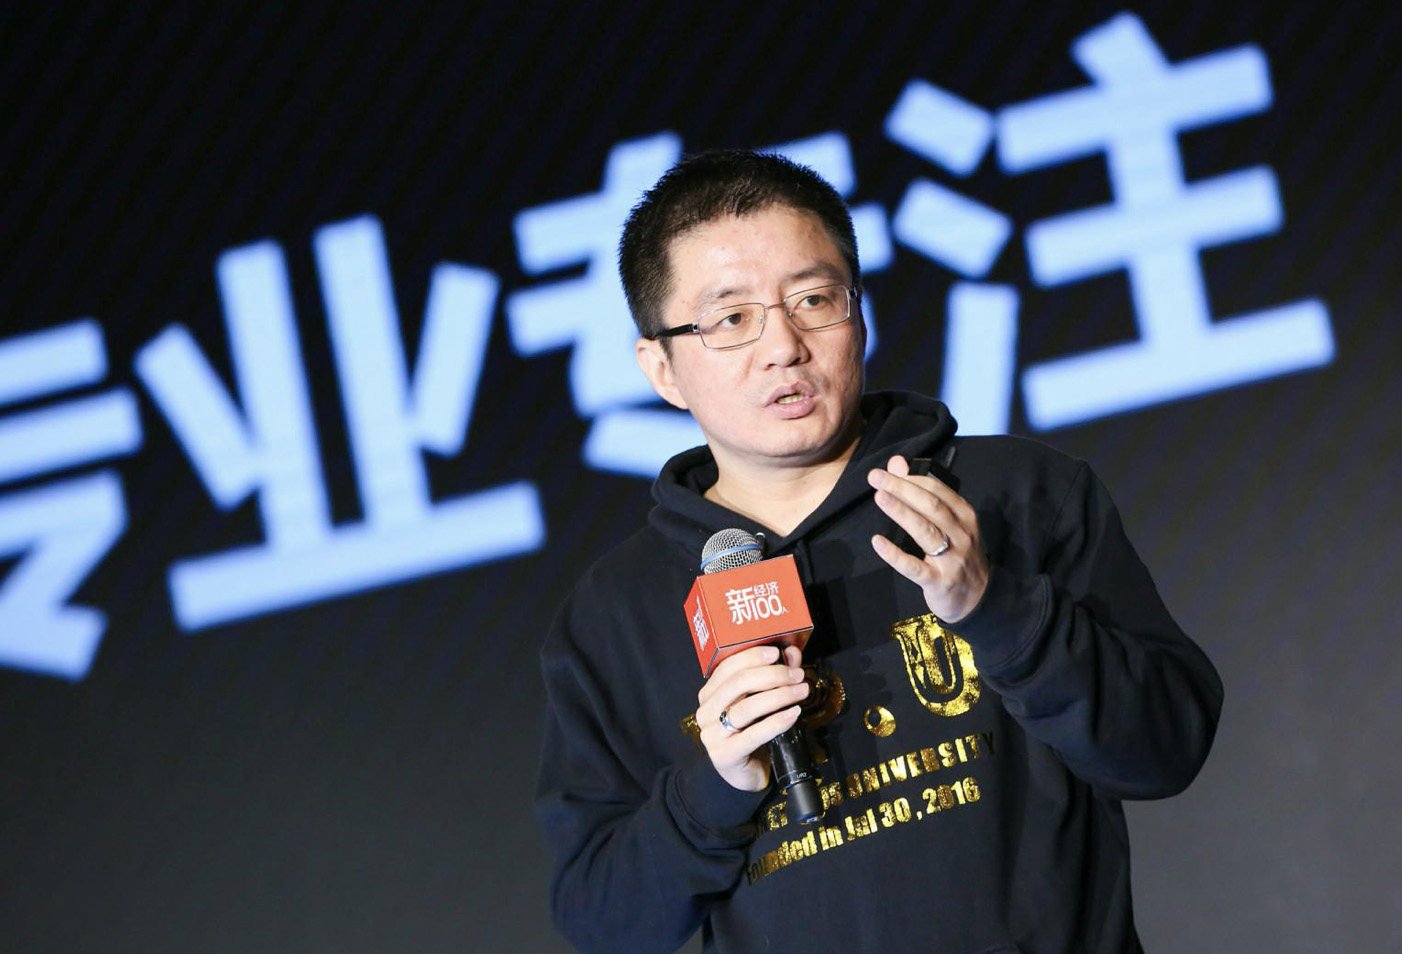 Meituan co-founder Wang Huiwen cited “personal health reasons” for stepping down from his corporate roles at the Chinese food delivery giant. Photo: Handout